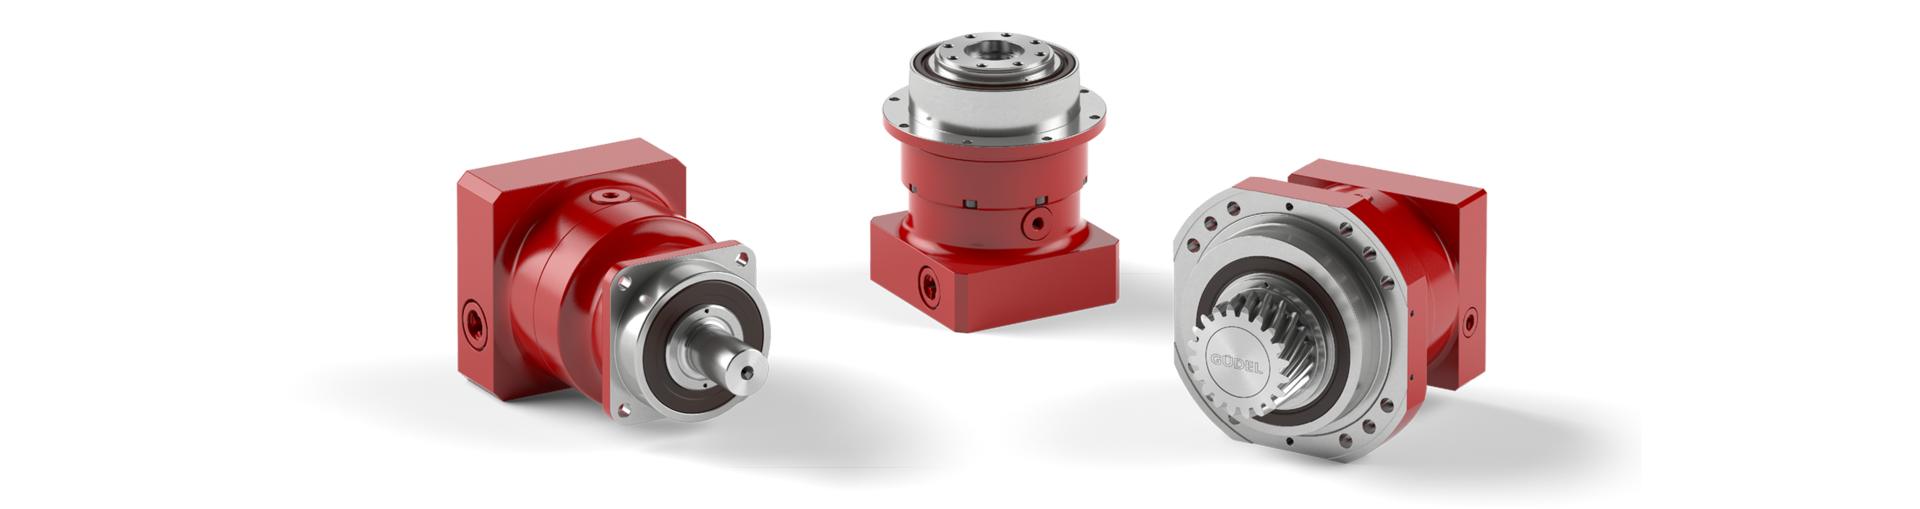 Planetary gear with optimized helical toothing | © Güdel Group AG